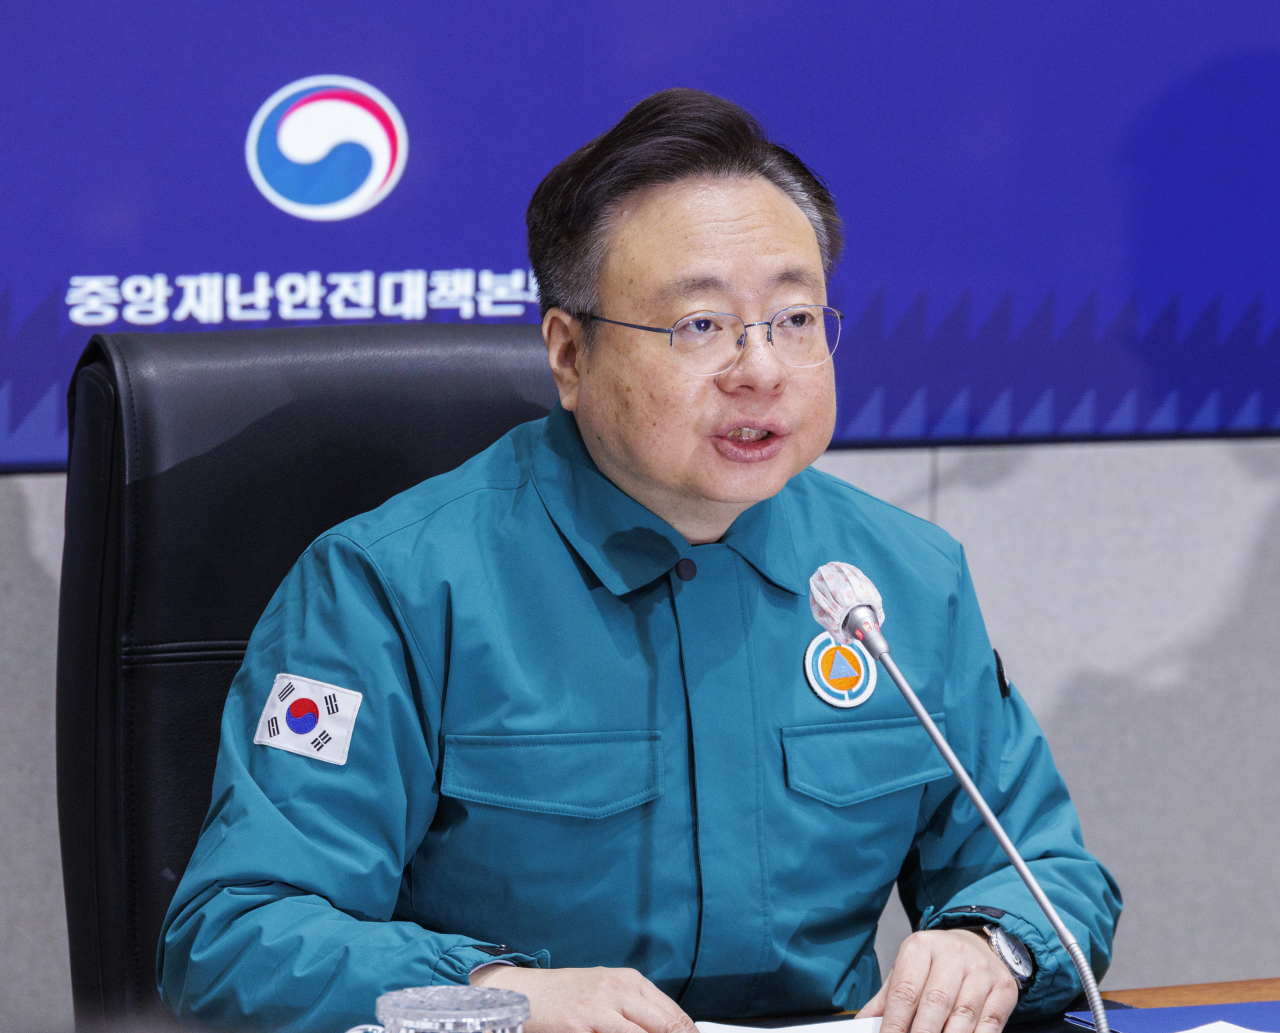 Health Minister Cho Kyoo-hong speaks during a Health Ministry Emergency Measures Committee held in Seoul on Tuesday. (Yonhap)